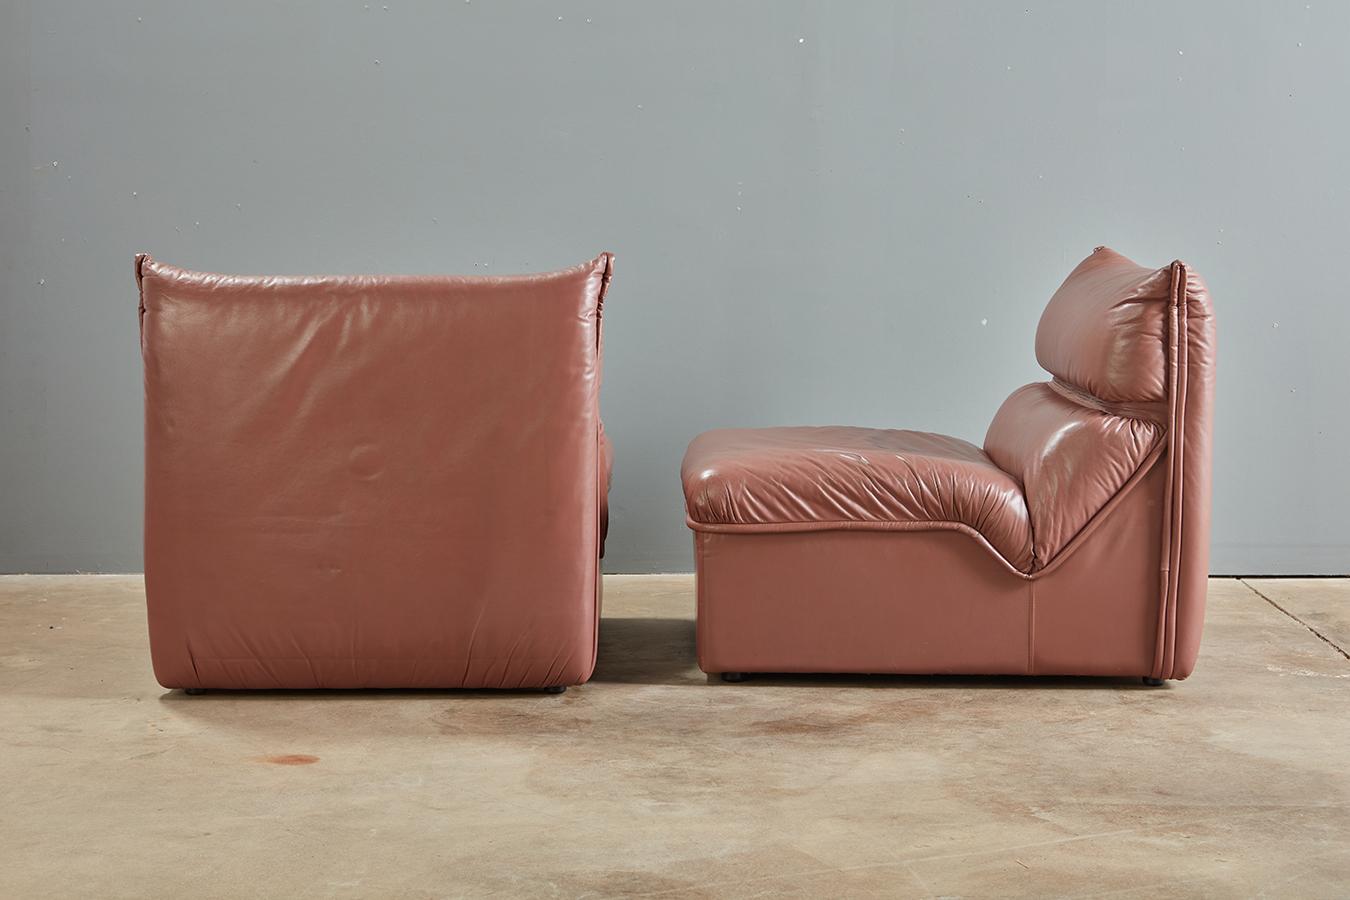 Pair of Leather Lounge Chairs by Guido Faleschini, I4 Mariani for Pace 1